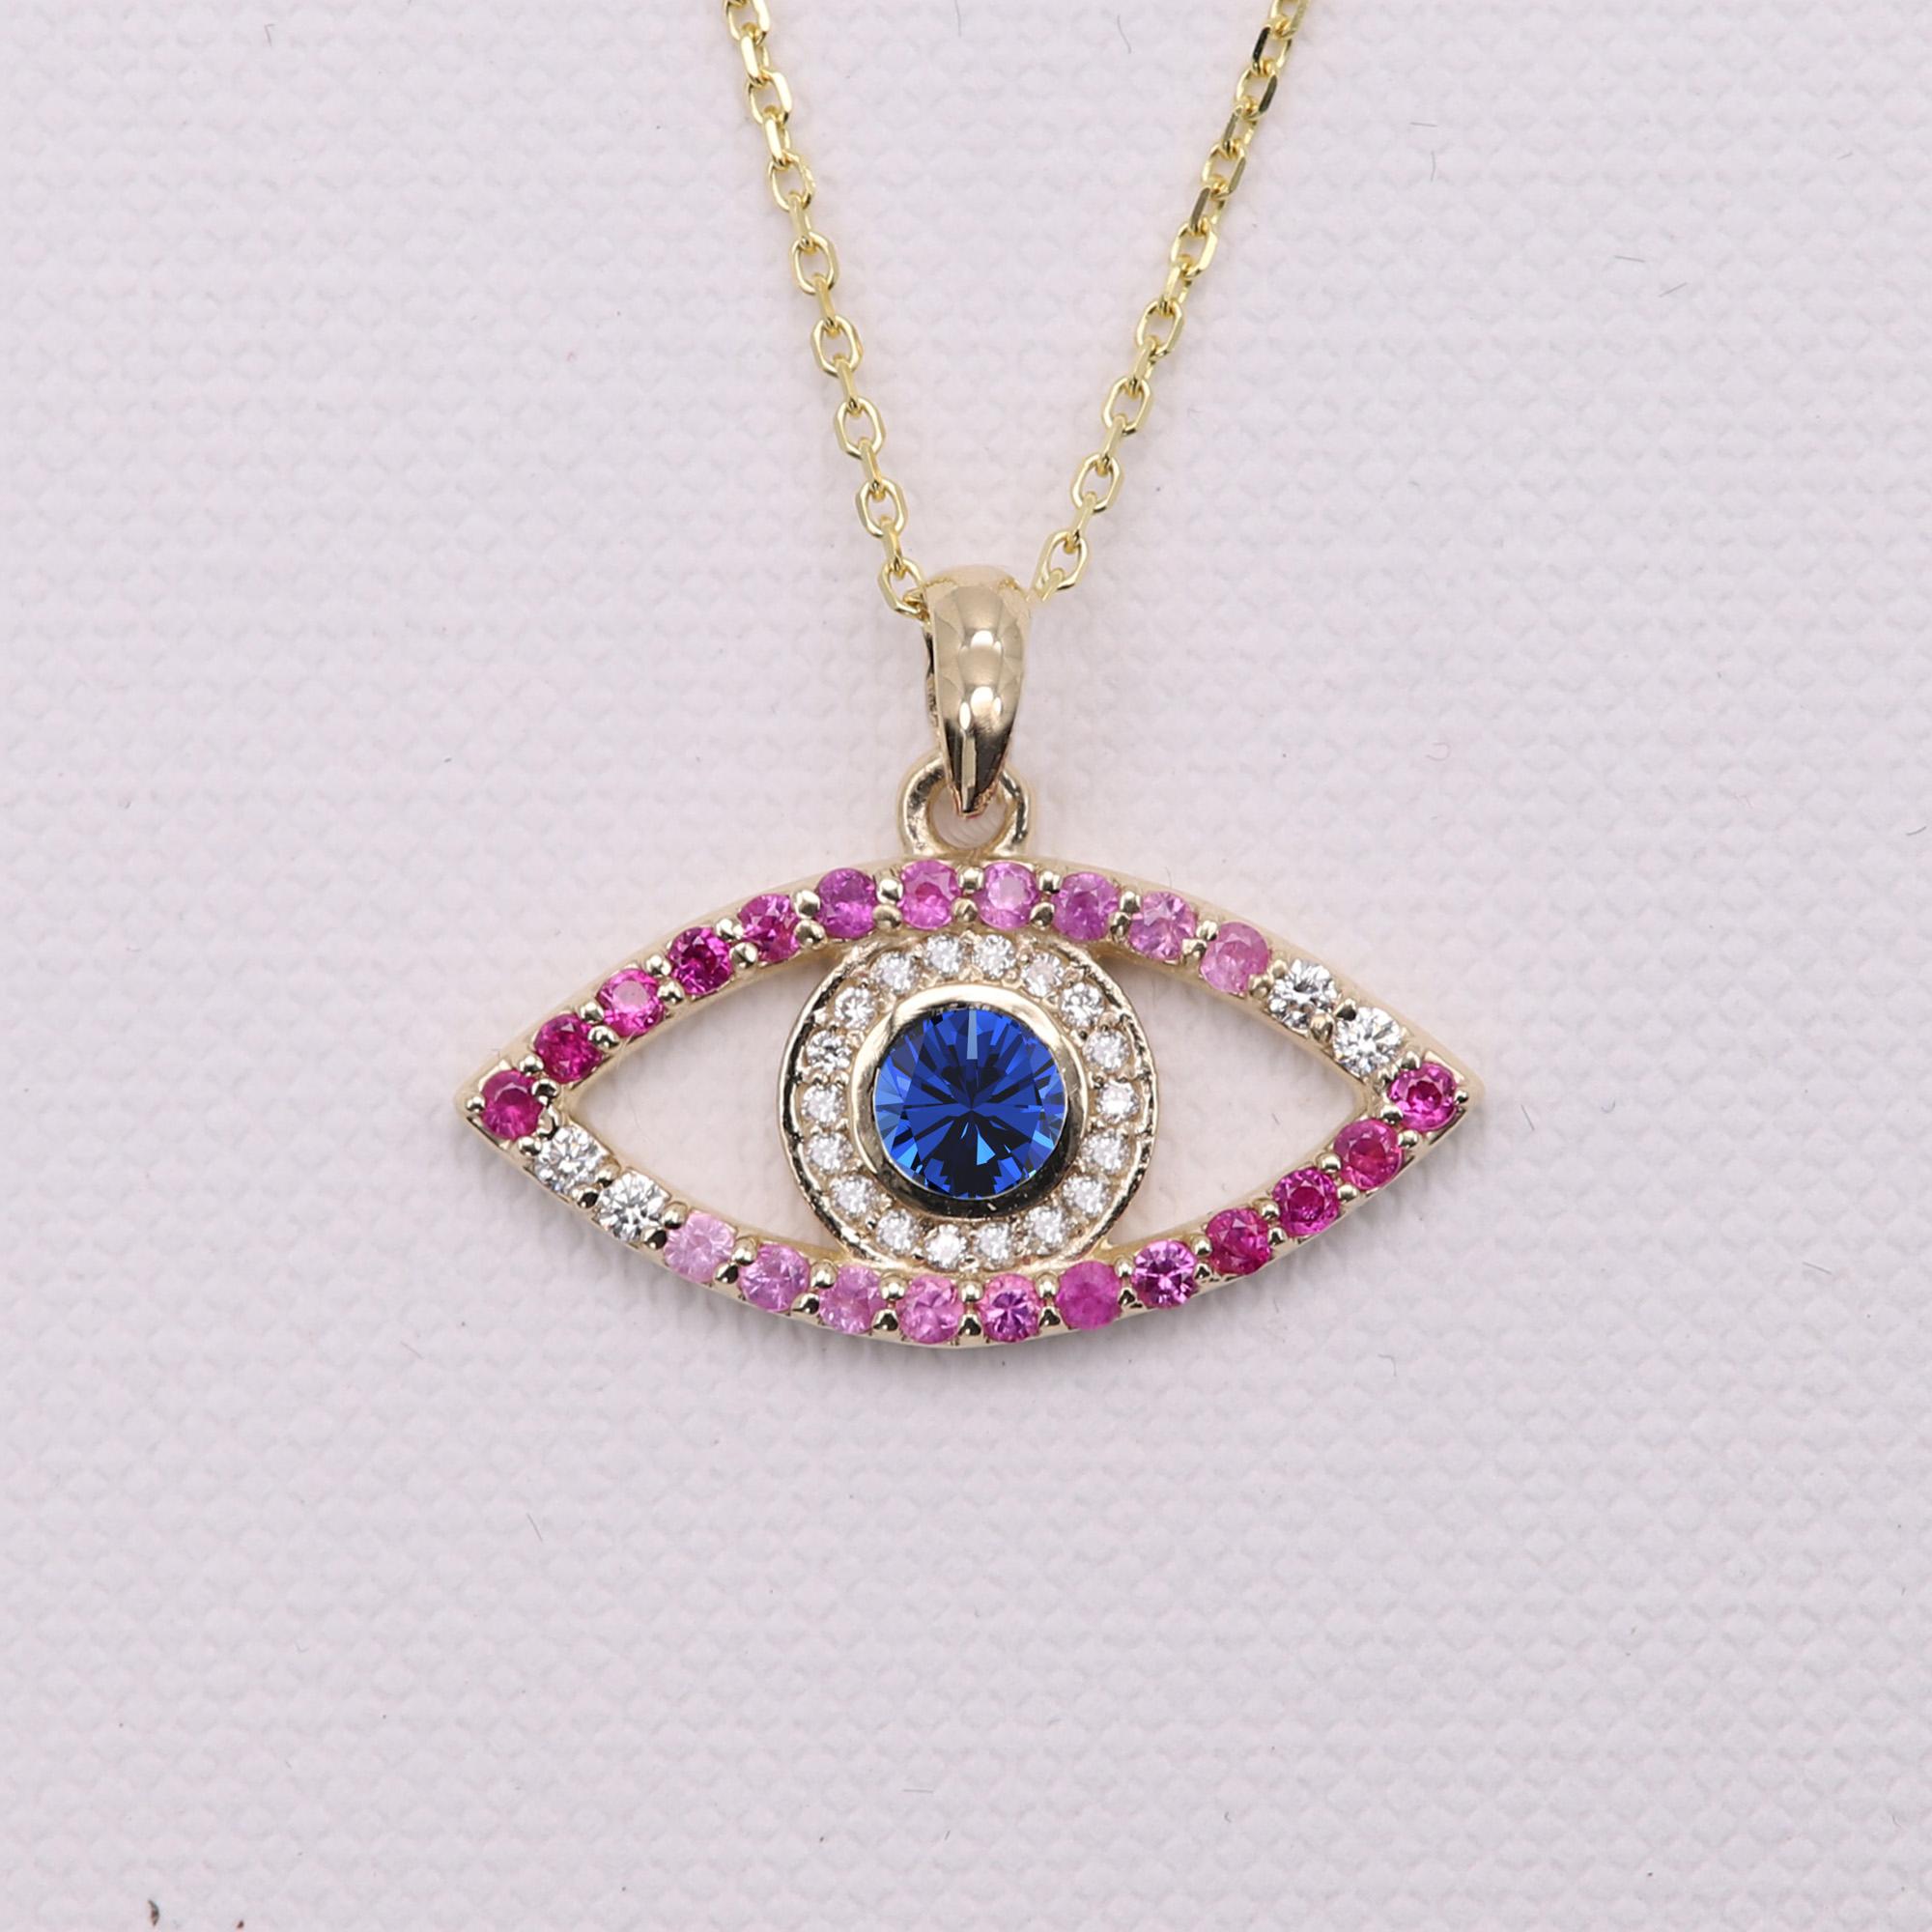 Brilliant Colors of mixed natural Gemstones
made in USA Evil Eye pendant 
14k Yellow Gold 2.0 grams (weight without the chain)
Center approx. 0.40 carat Blue Sapphire [Ceylon]
Small natural Diamonds approx.0.10 carat G-VS
Red and Pink natural